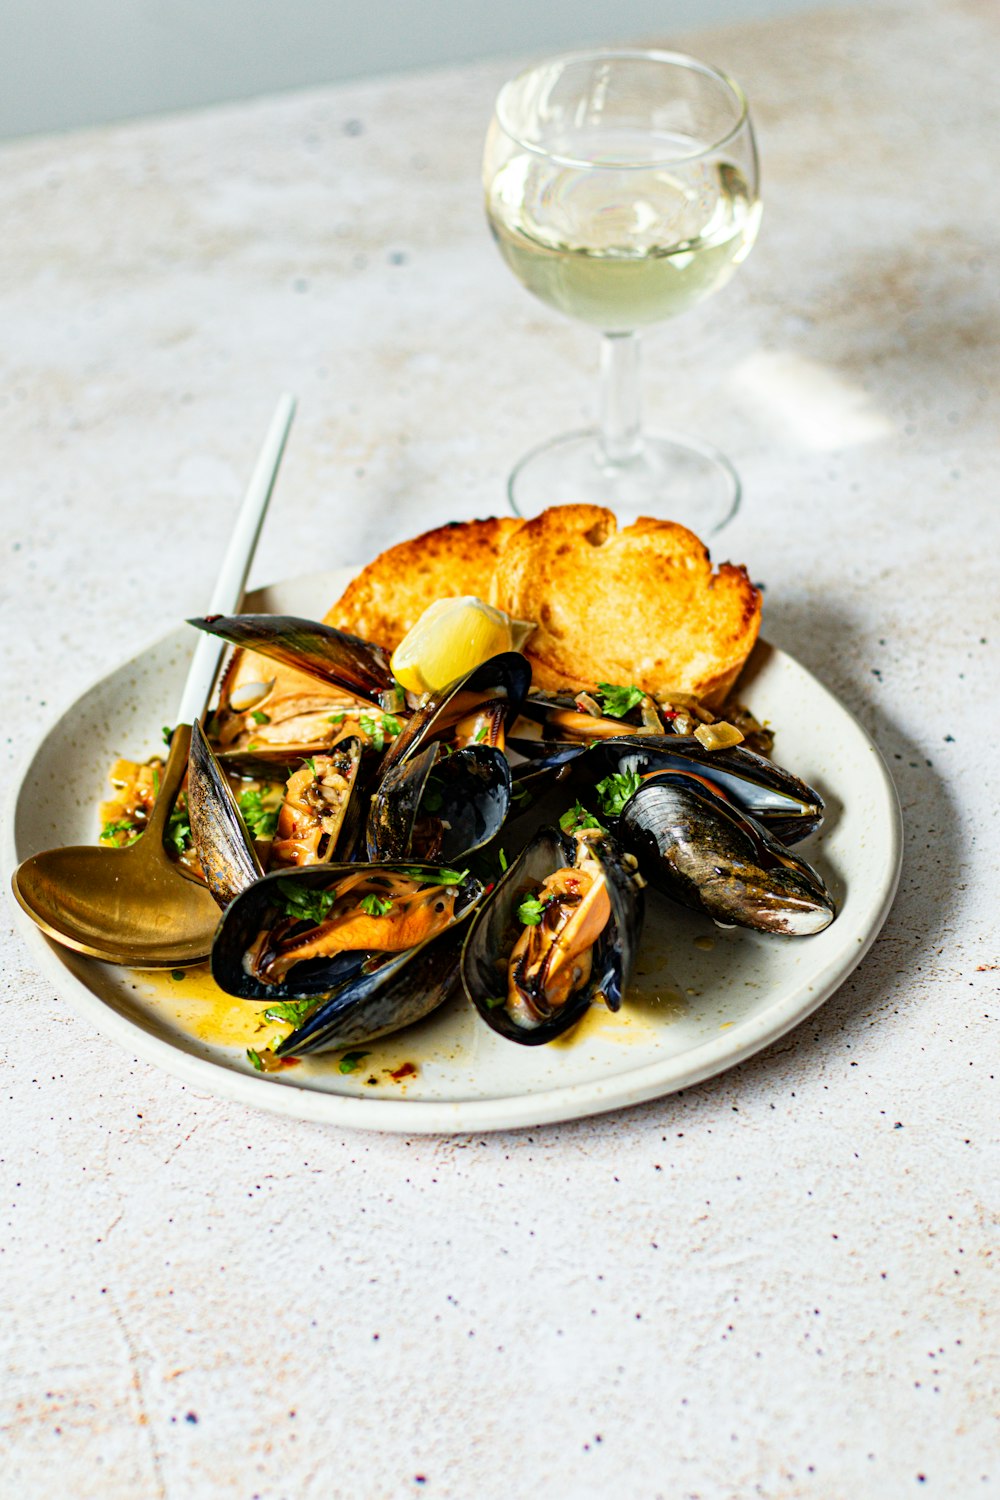 a plate of mussels and bread with a glass of wine